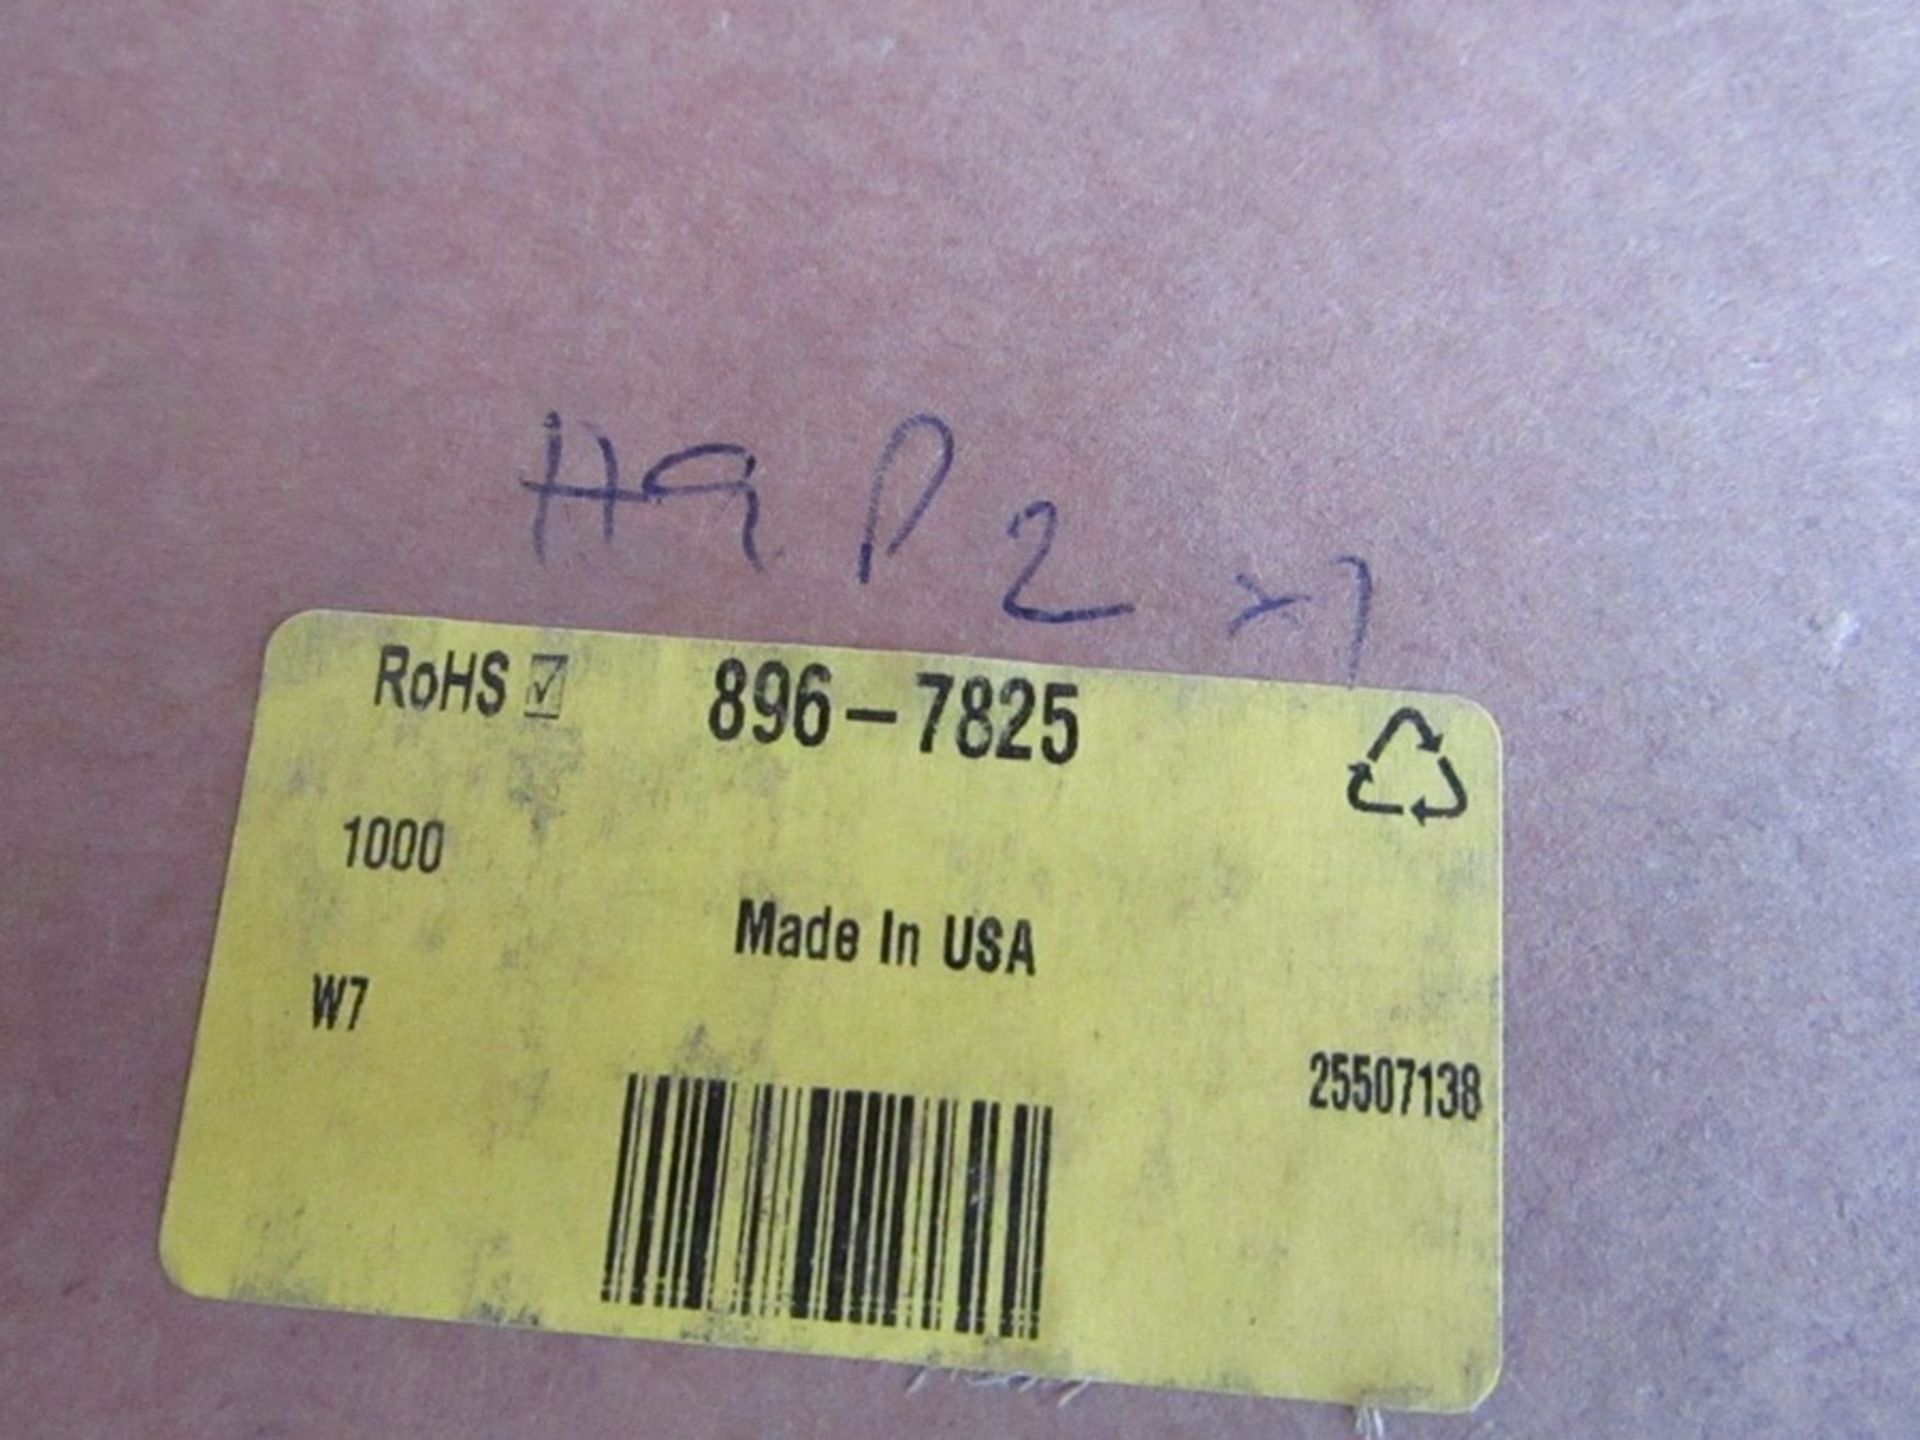 Box of 1000 TE Connectivity D-SCE Heat Shrink Cable Marker White 1005fc 8967825 - Image 3 of 3